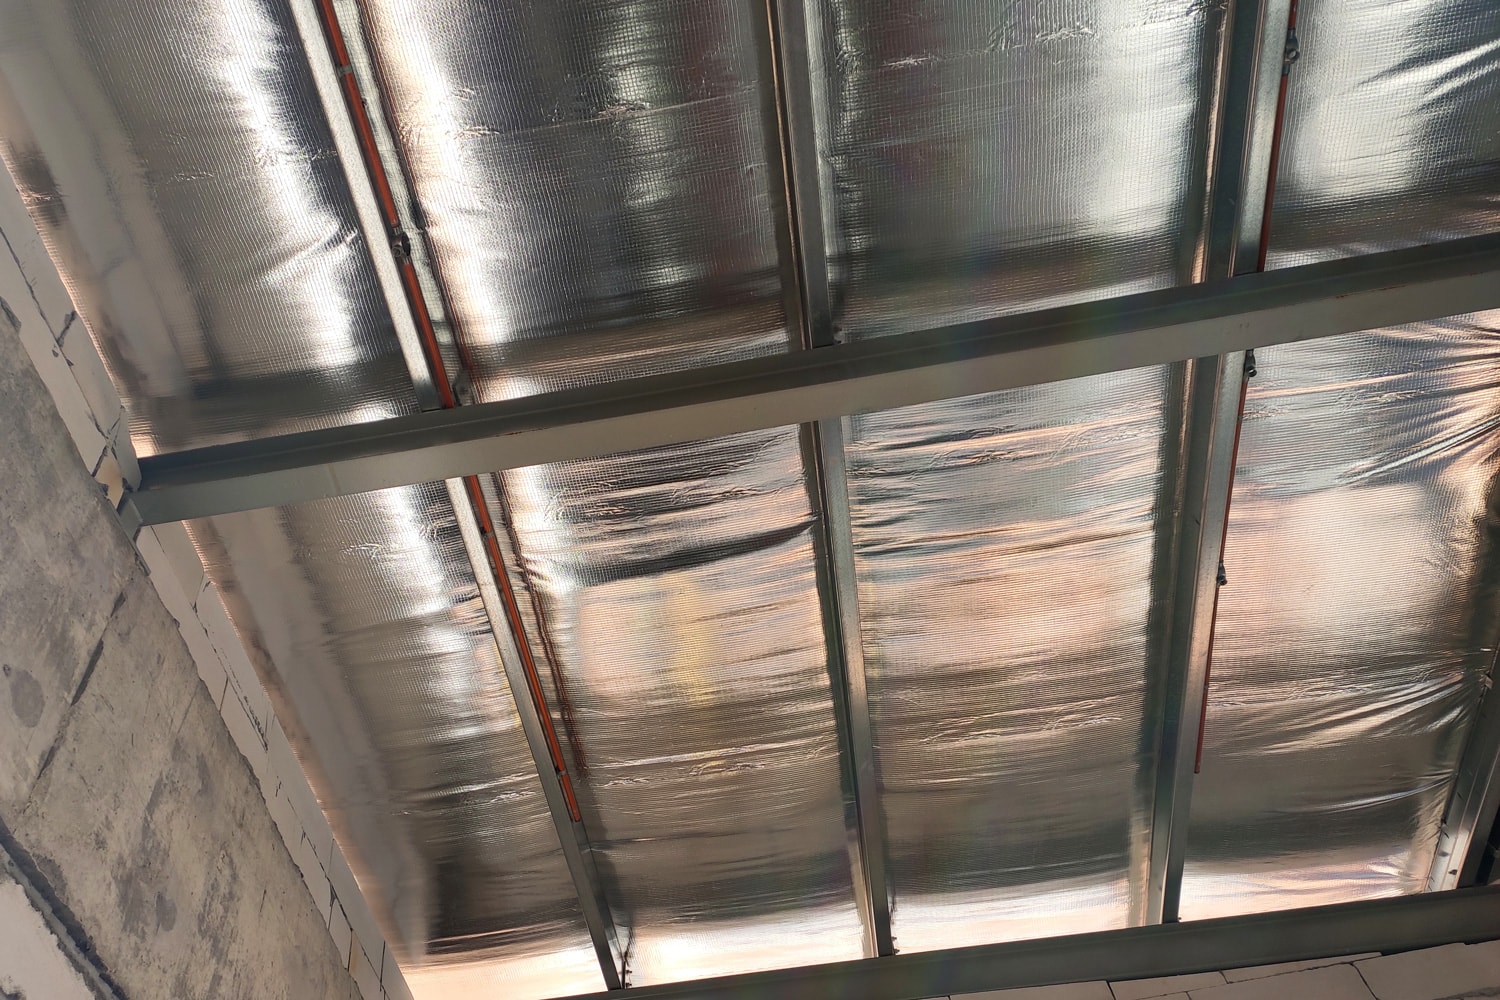 Aluminum foil sheets are used as thermal insulation of the roof. Placed under the roof layer. It can reduce the heat transferred into the building from sunlight. 